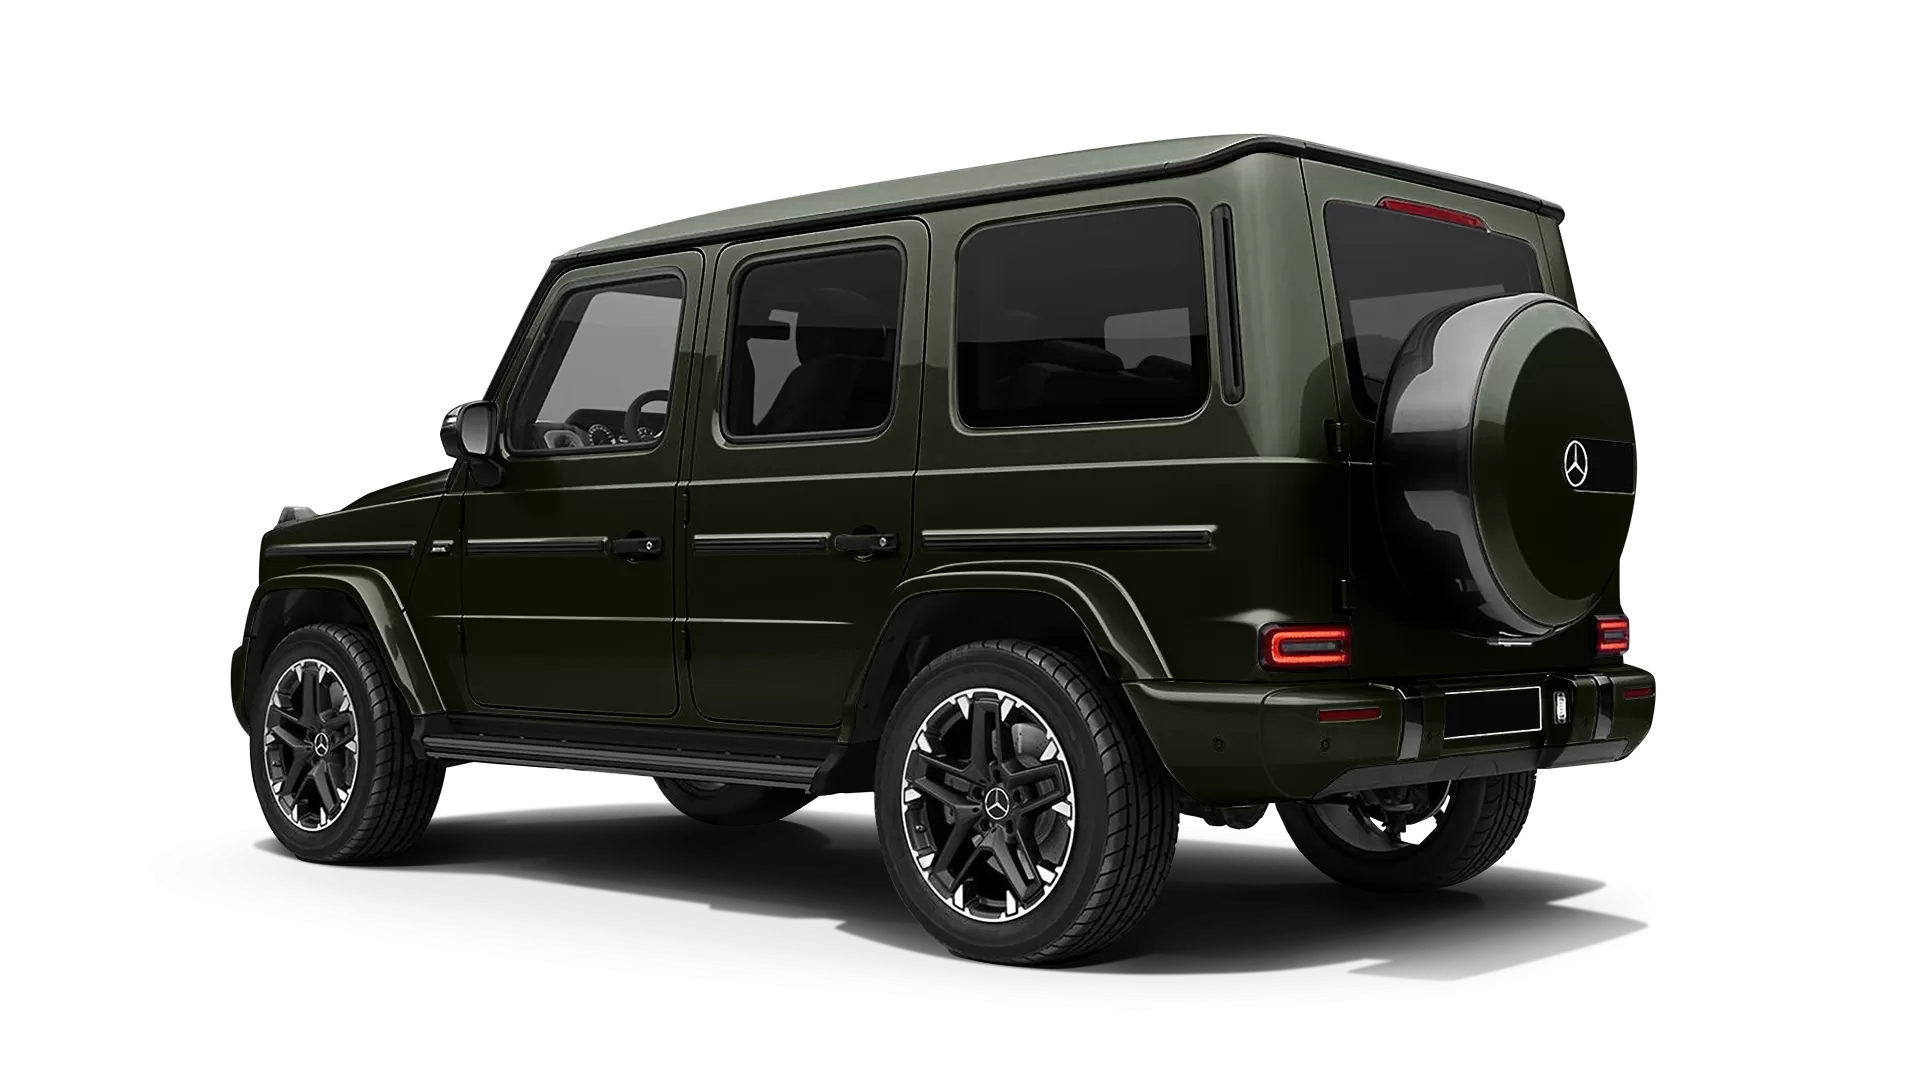 Mercedes G class W463 stock rear view in Dark Olive color